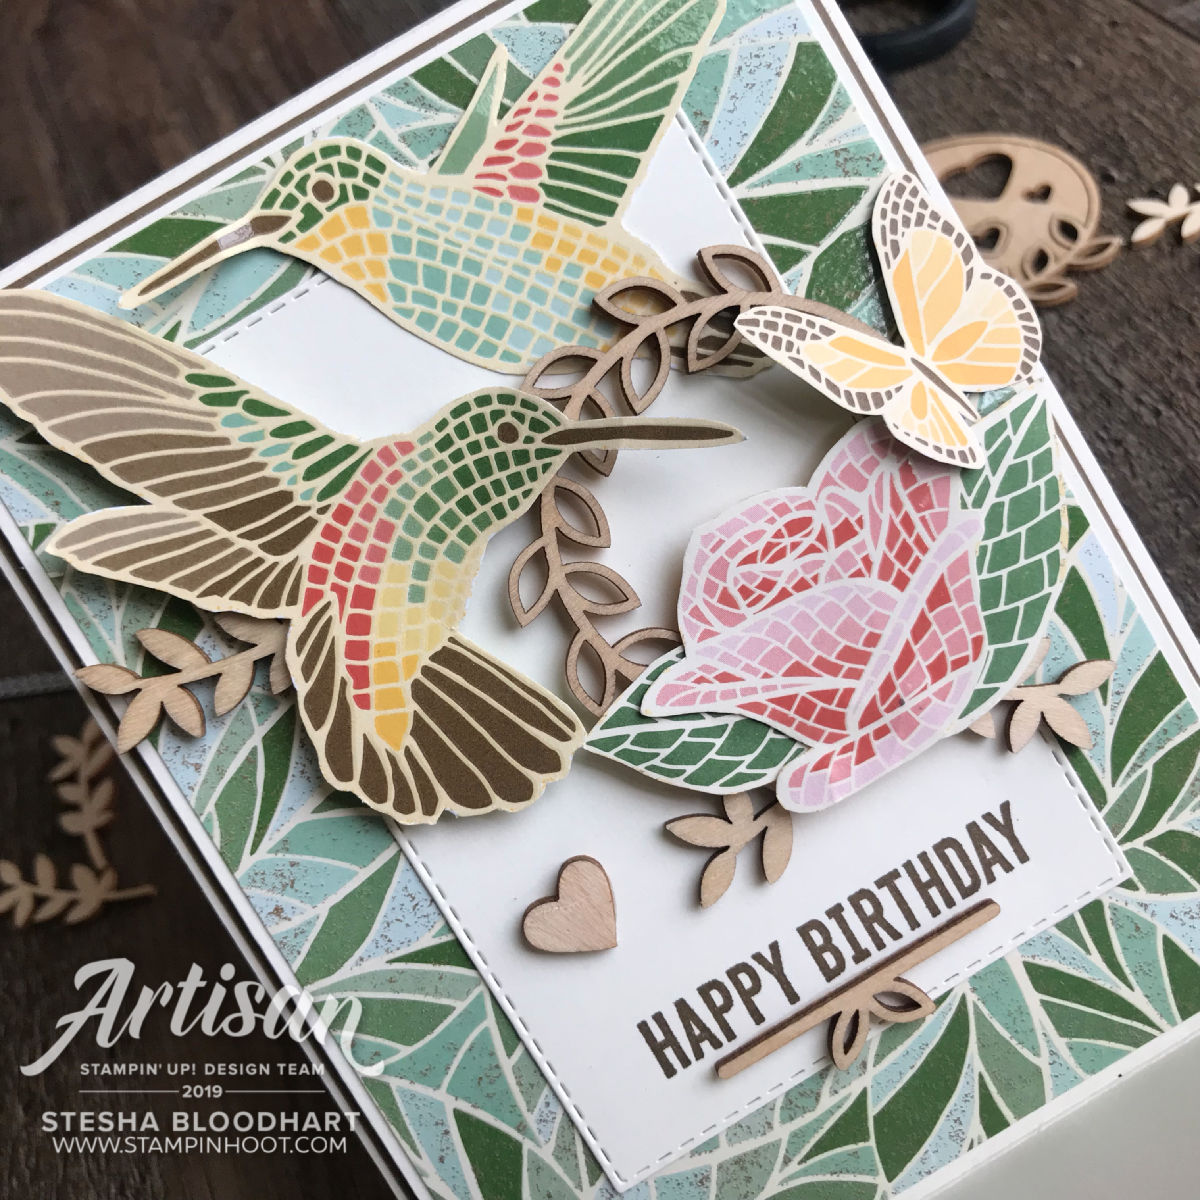 Create this friend card using the Artfully Aware Stamp Set by Stampin' Up! Card created by Stesha Bloodhart, Stampin' Hoot!